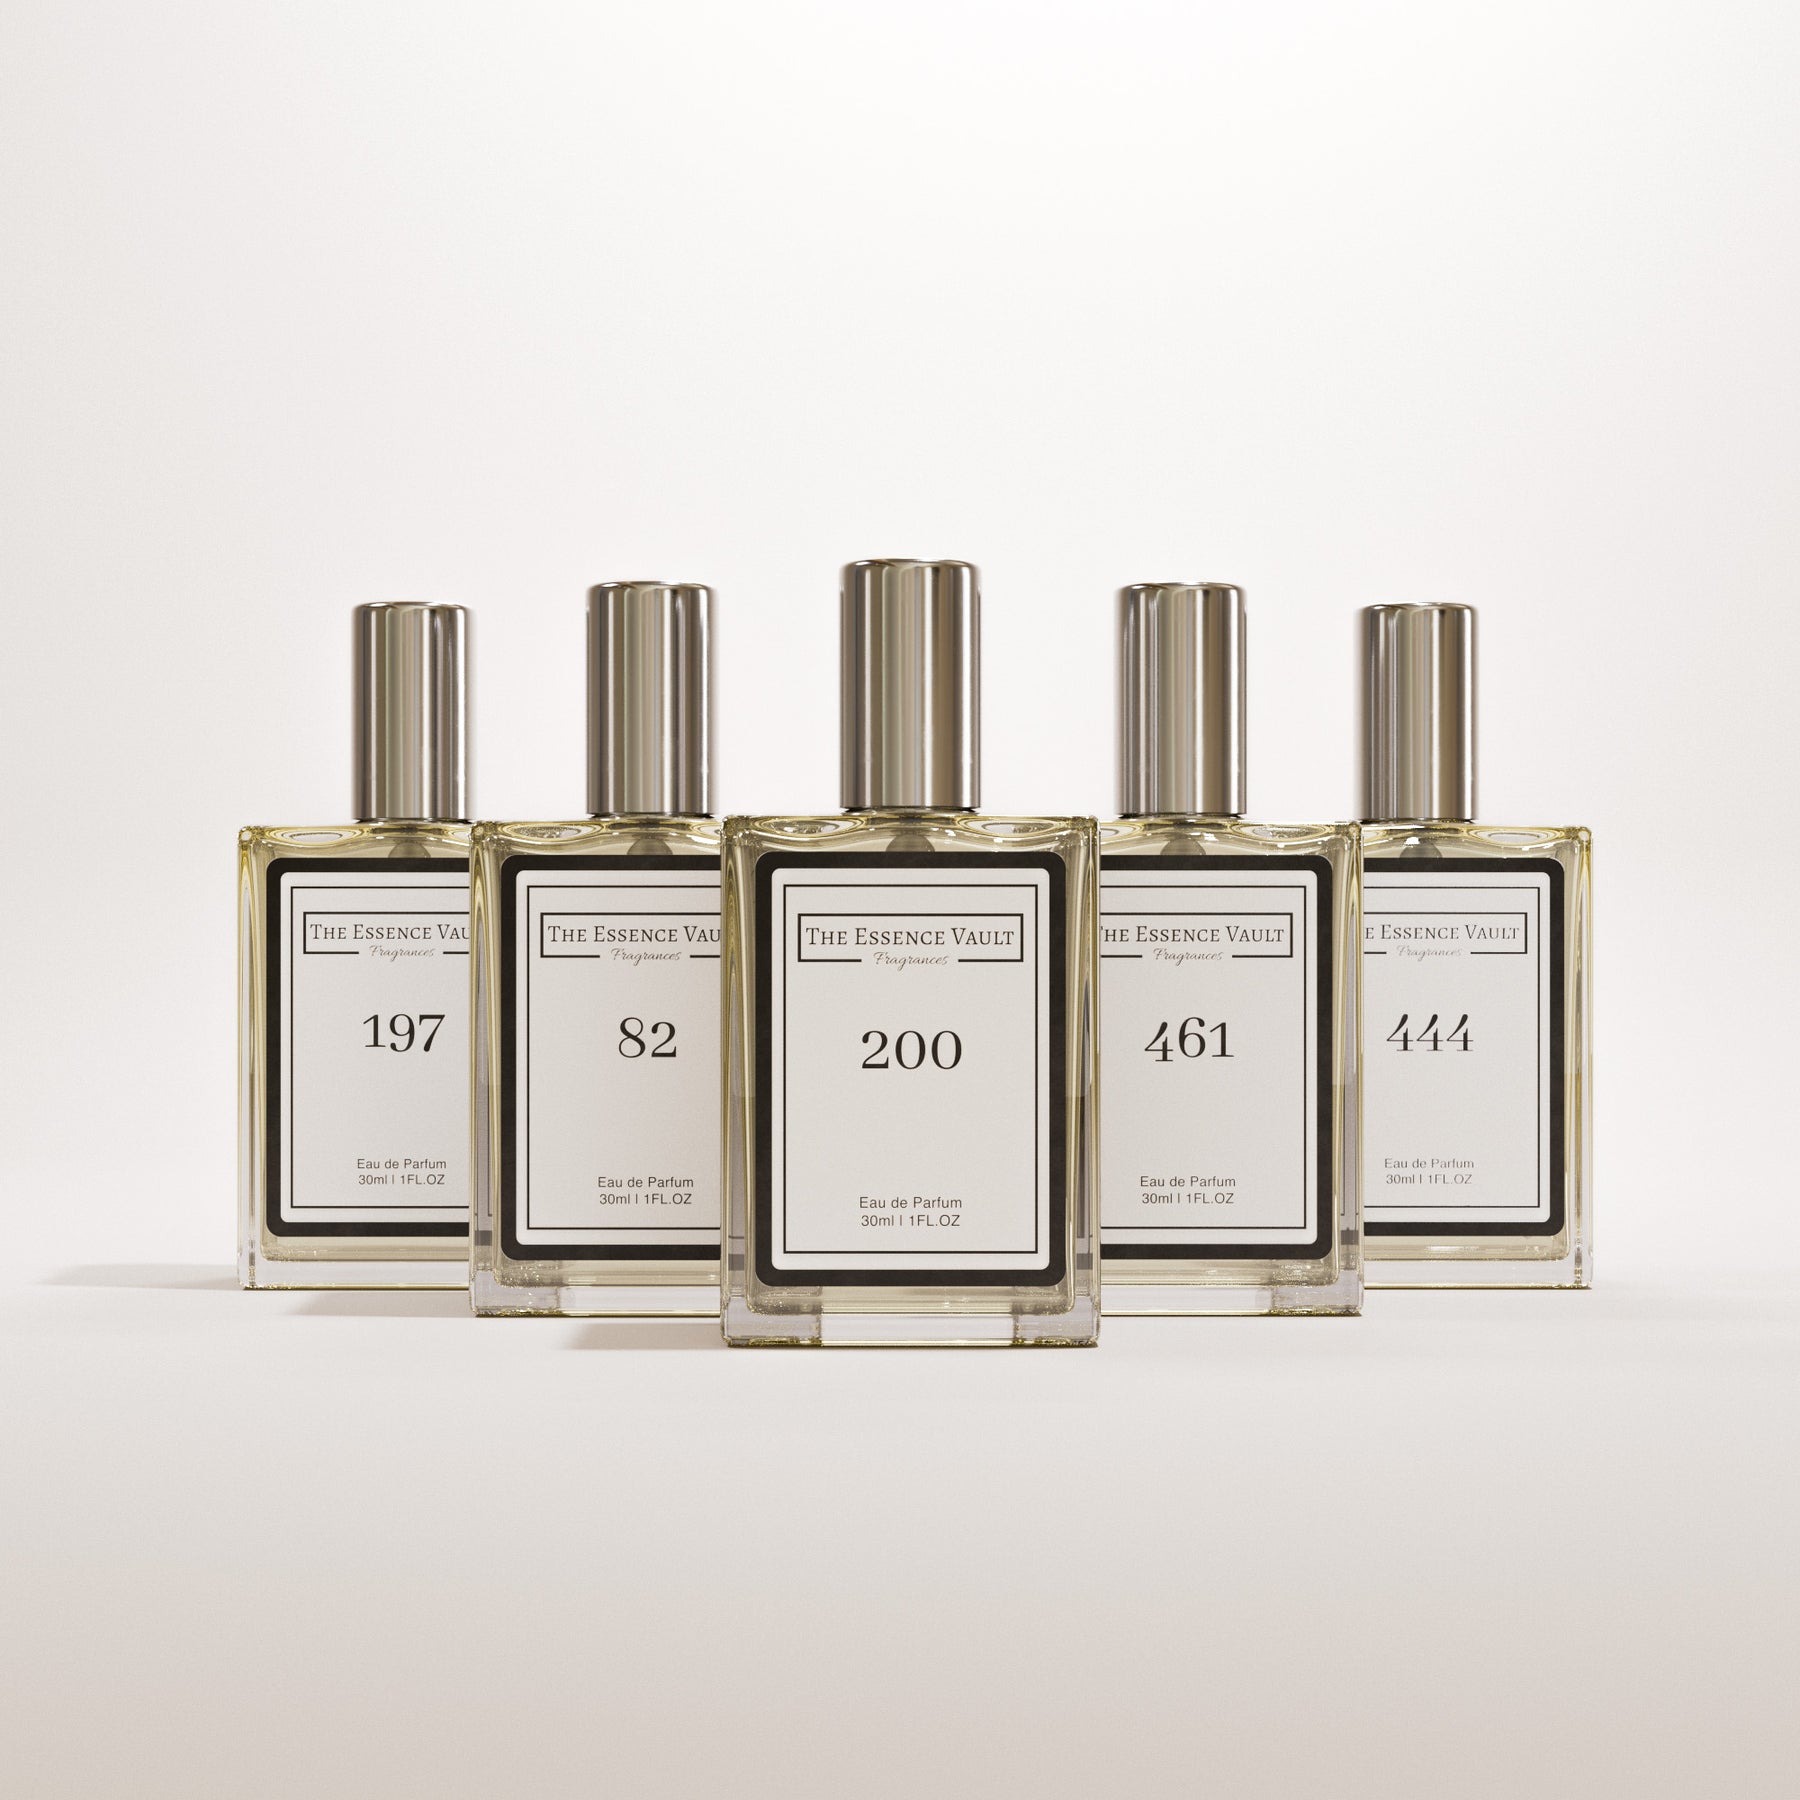 “Unveiling Luxury Scents: The Essence Vault’s Exquisite Fragrance Collections”